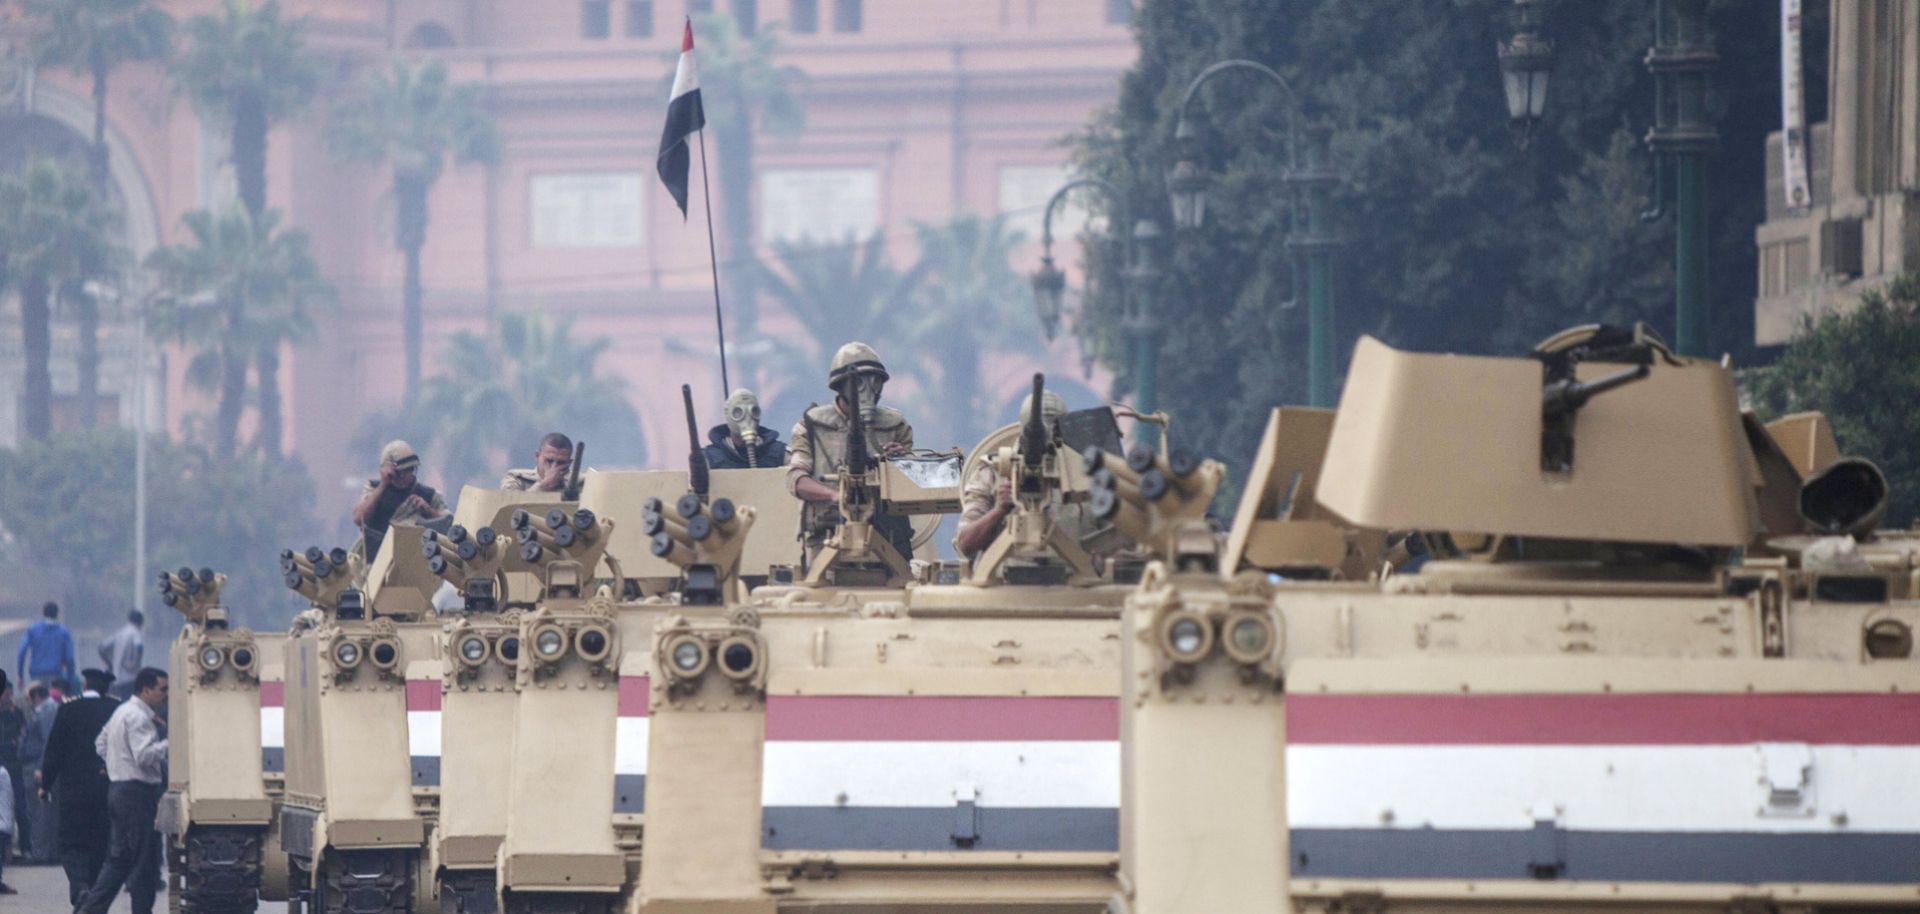 Egyptian military M113 armored personnel carriers arrive at Cairo’s Tahrir Square on Dec. 1, 2013 after dispersing Cairo University students rallying for ousted President Mohamed Morsi. (MAHMOUD KHALED/AFP/Getty Images)